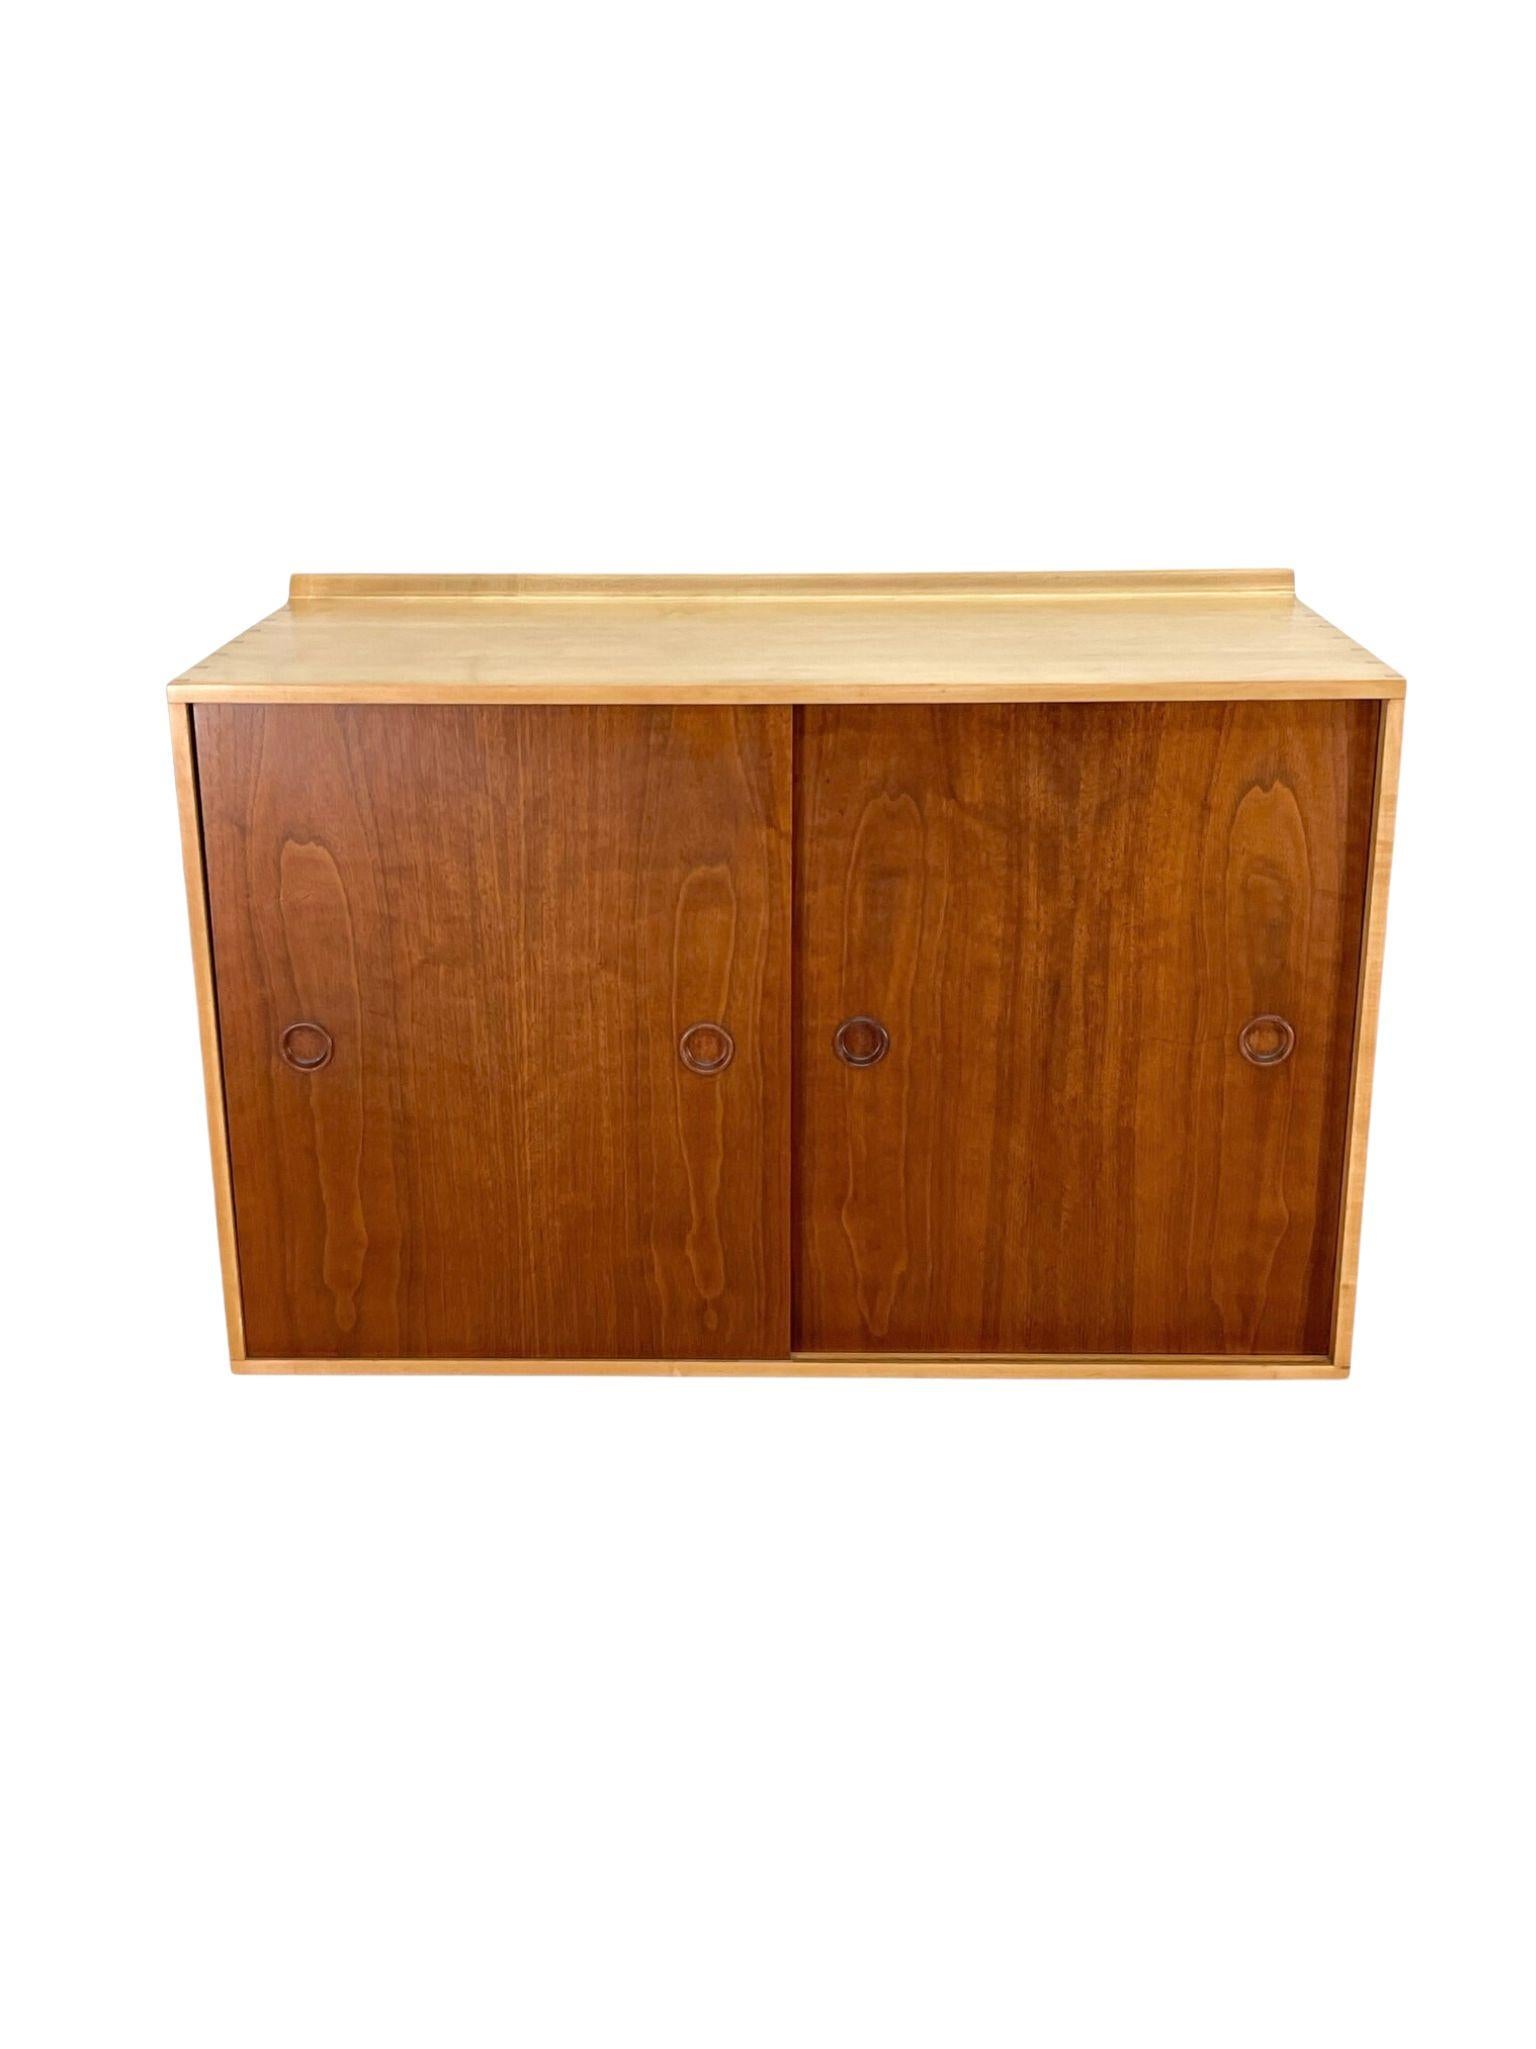 This is a wall mounted cabinet / console designed by Finn Juhl and manufactured by Baker, 1950s made from teak and maple. The beautiful grain pattern in the teak door fronts make for a striking contrast with the maple case.

Has interchangeable